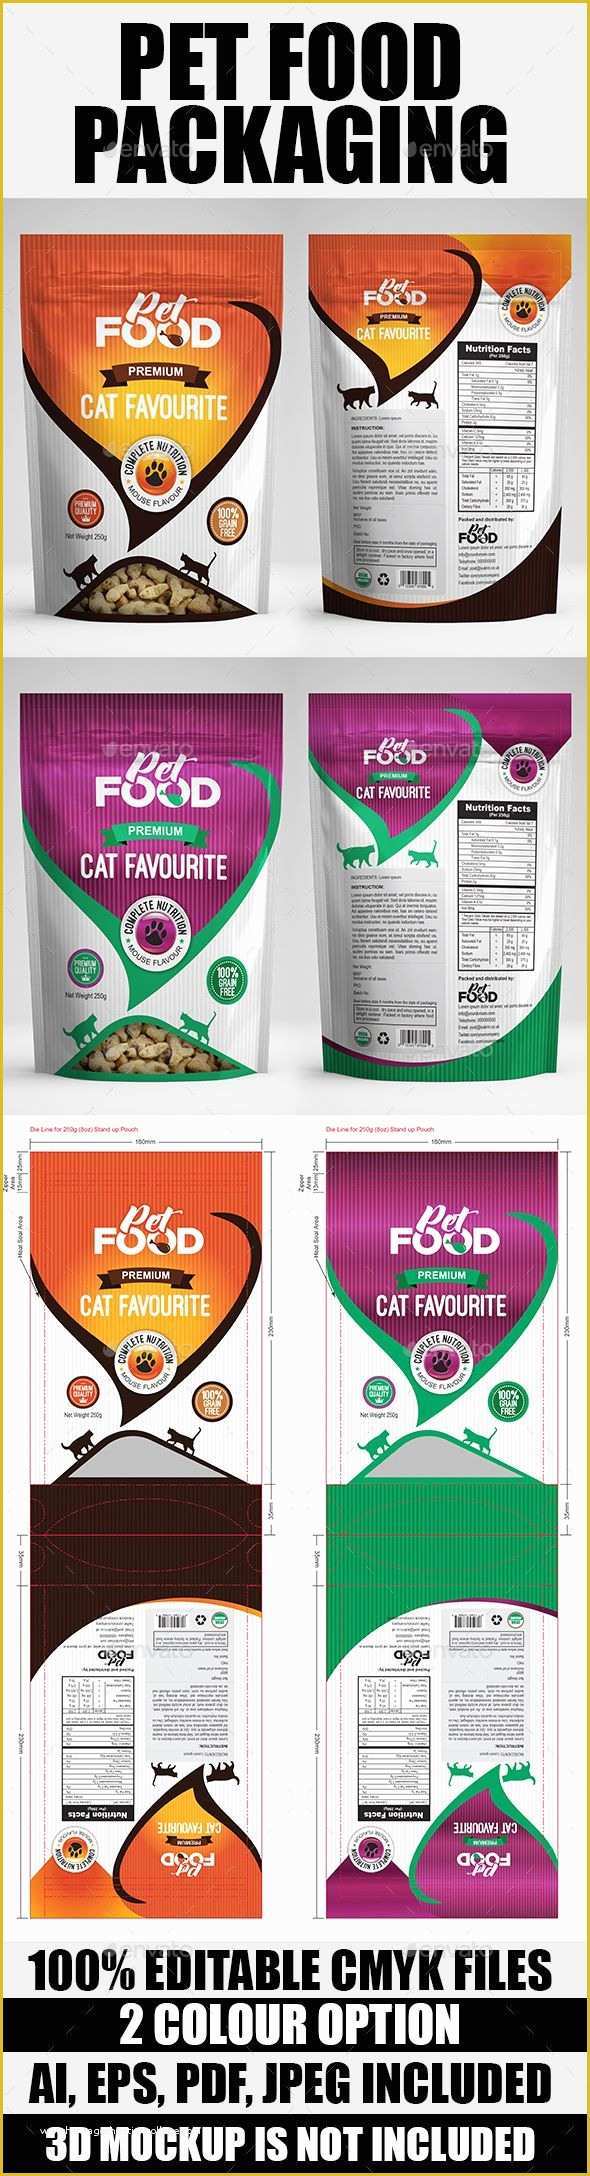 Food Packaging Design Templates Free Of Food Packaging Design Templates Free Best Design Pet